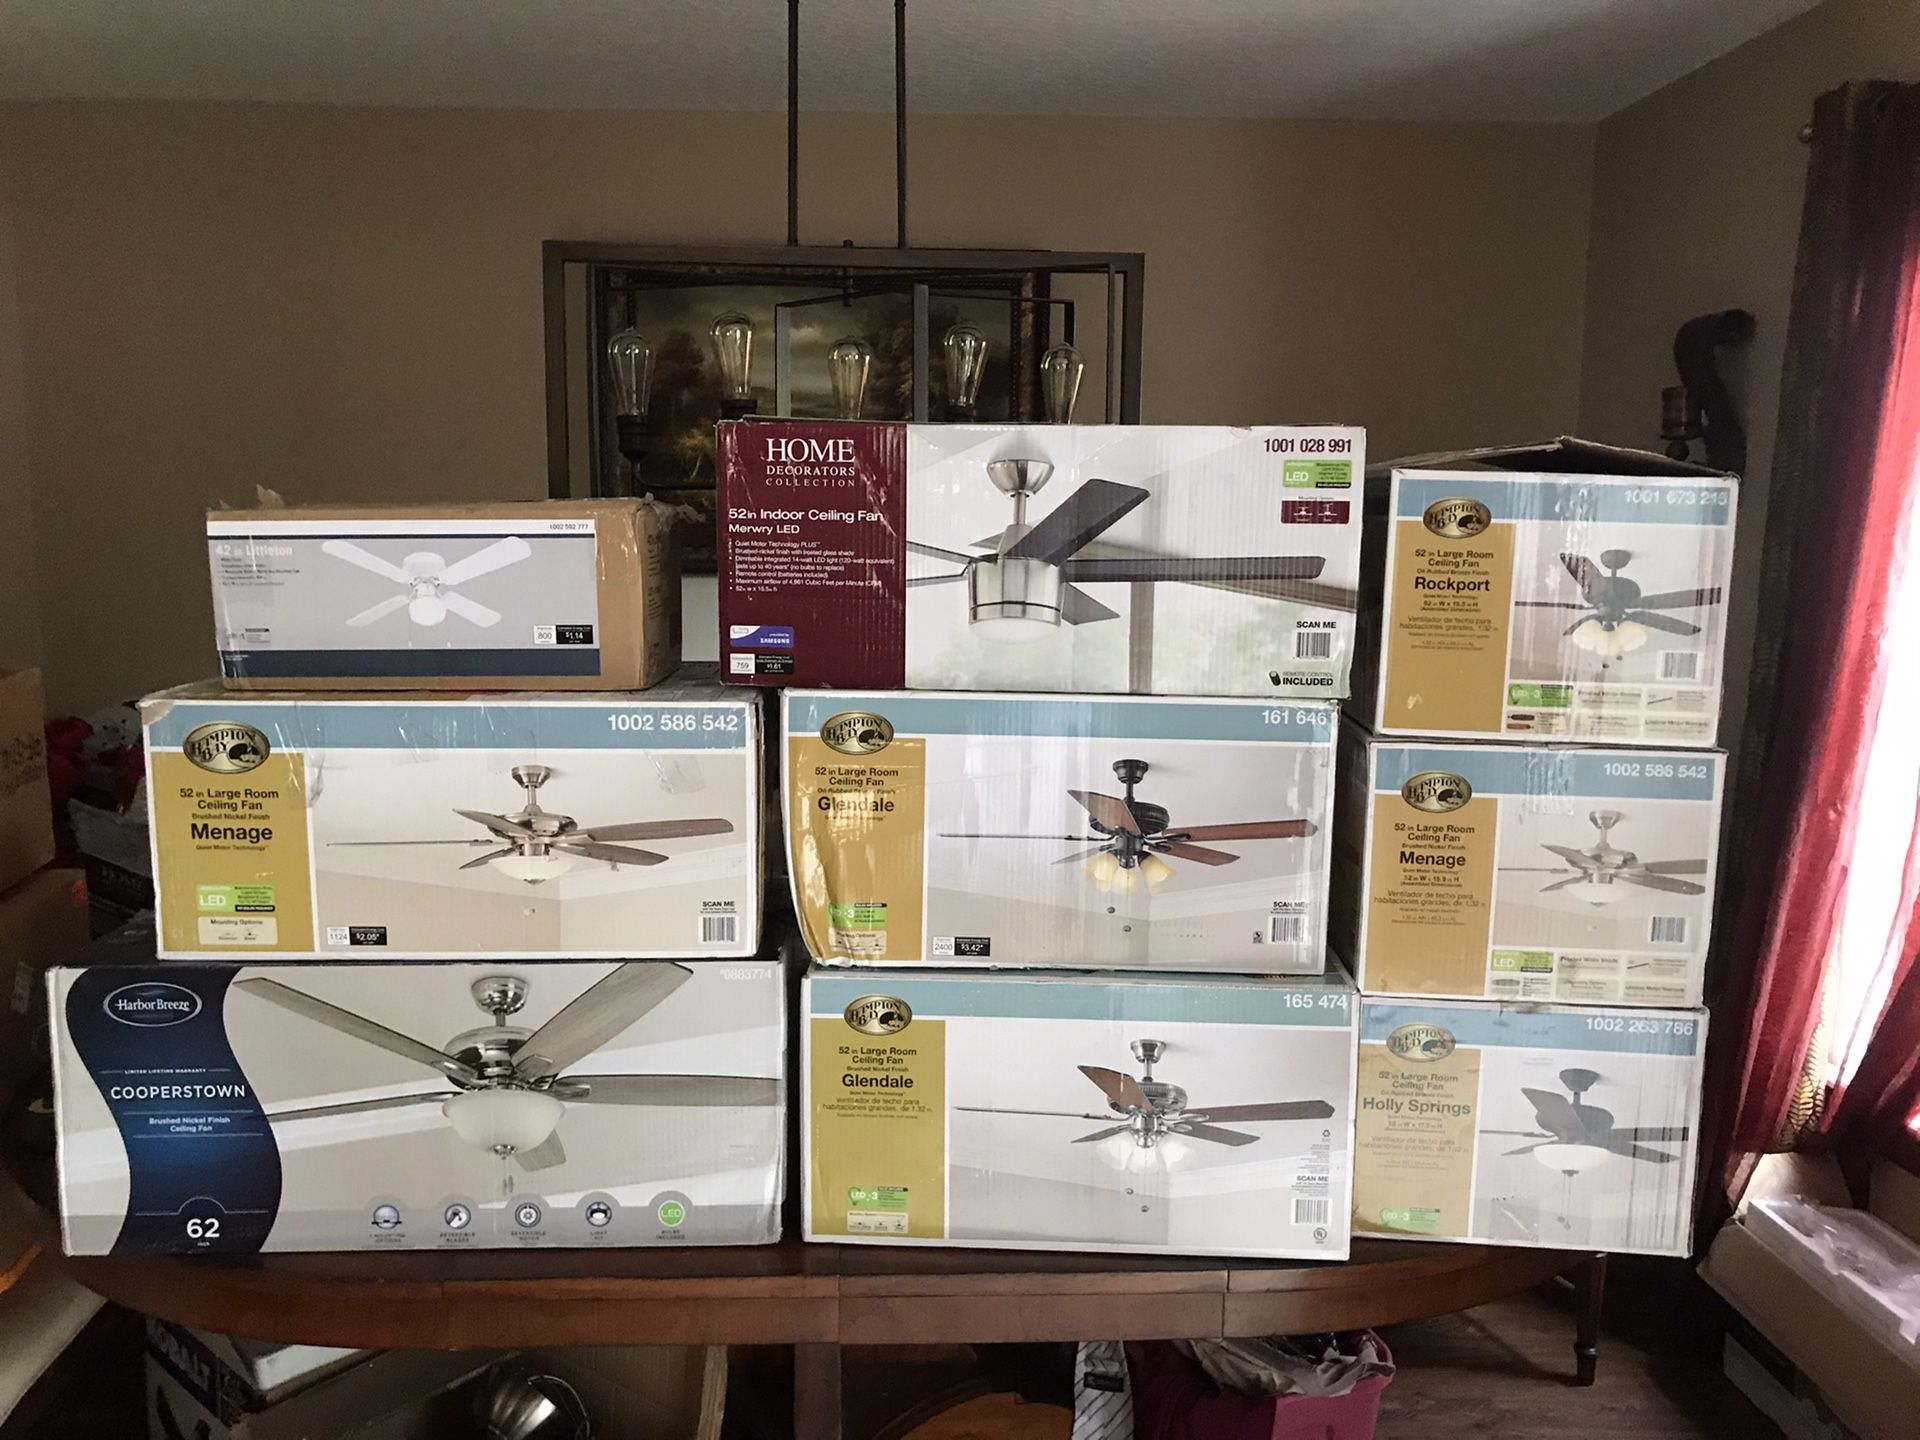 Variety of NEW Ceiling Fans •LED • Remote • Energy Savers•